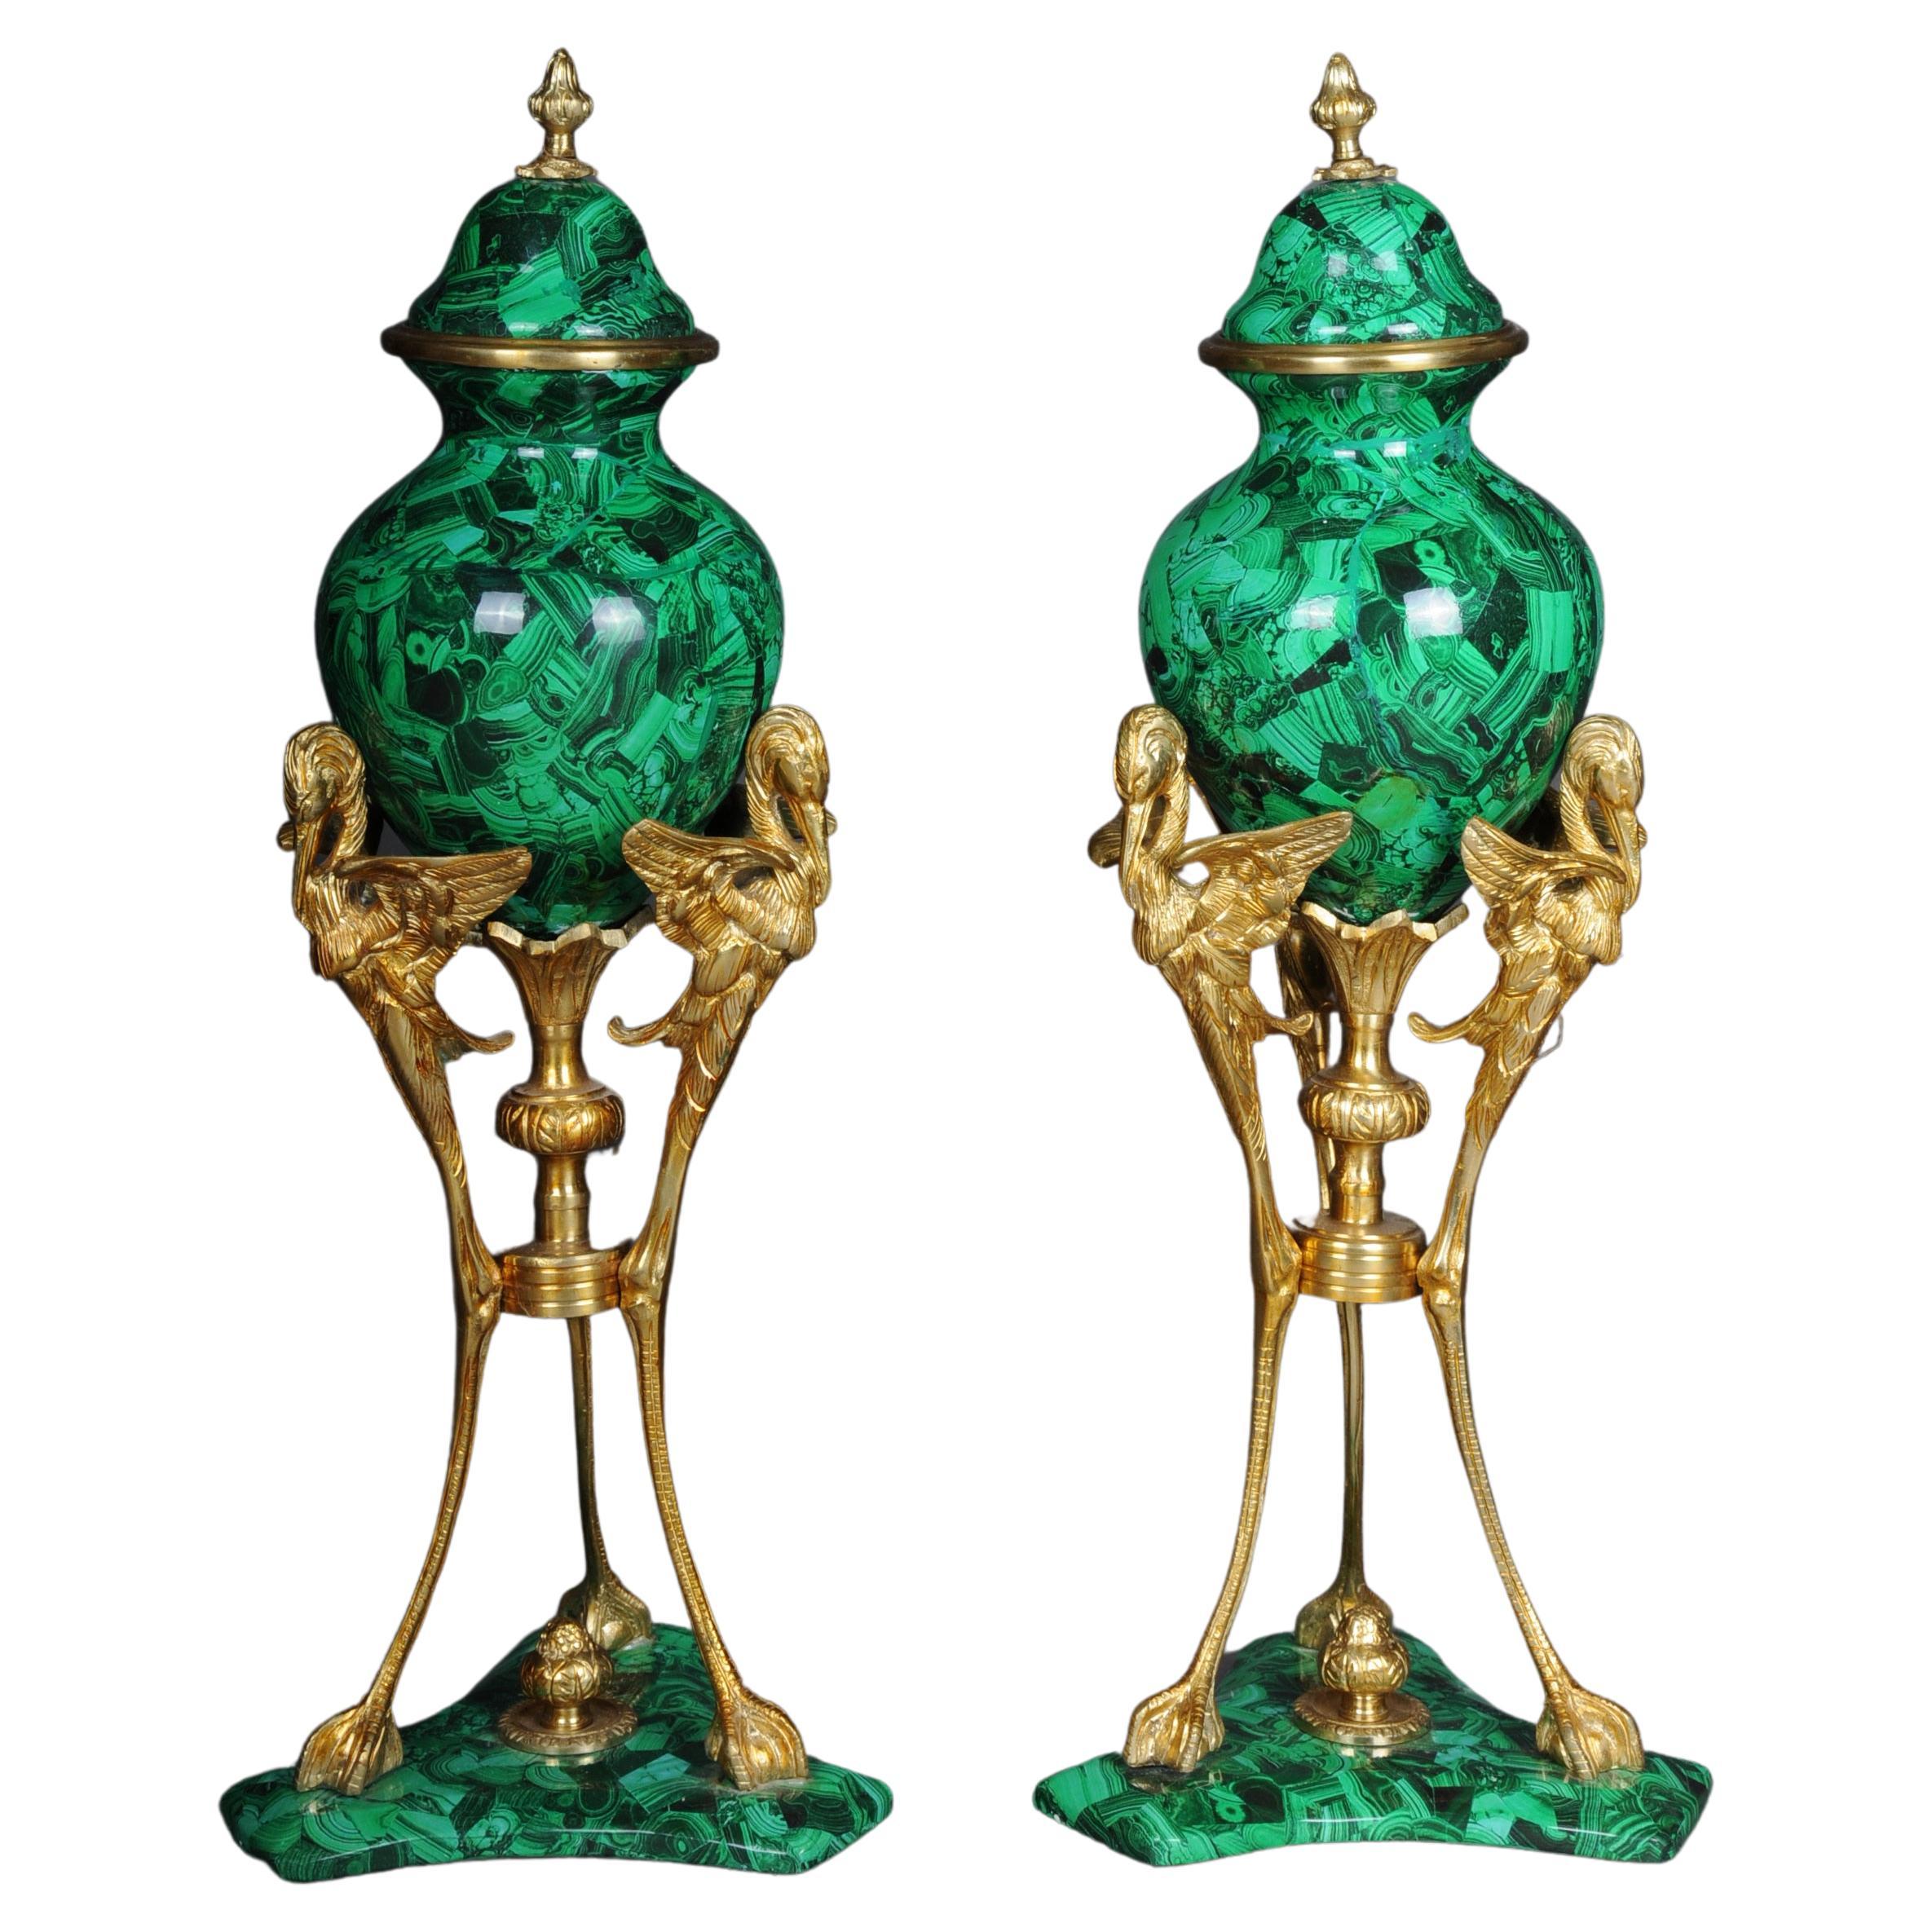 Pair '2' of Impressive Table Vases with Malachite and Brass